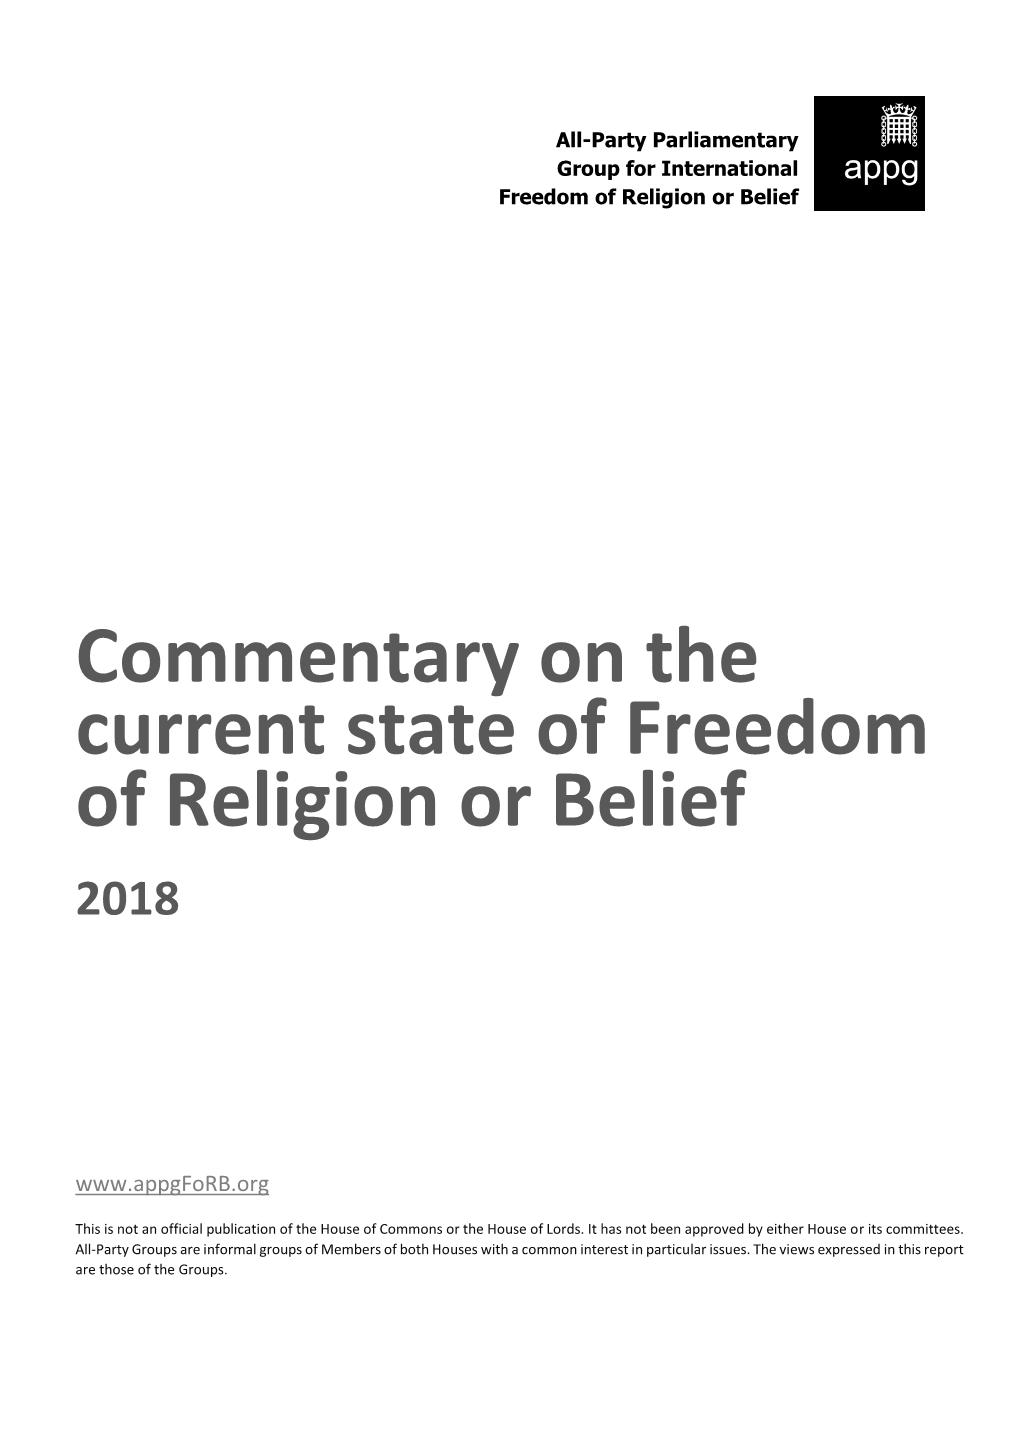 Commentary on the Current State of Freedom of Religion Or Belief 2018